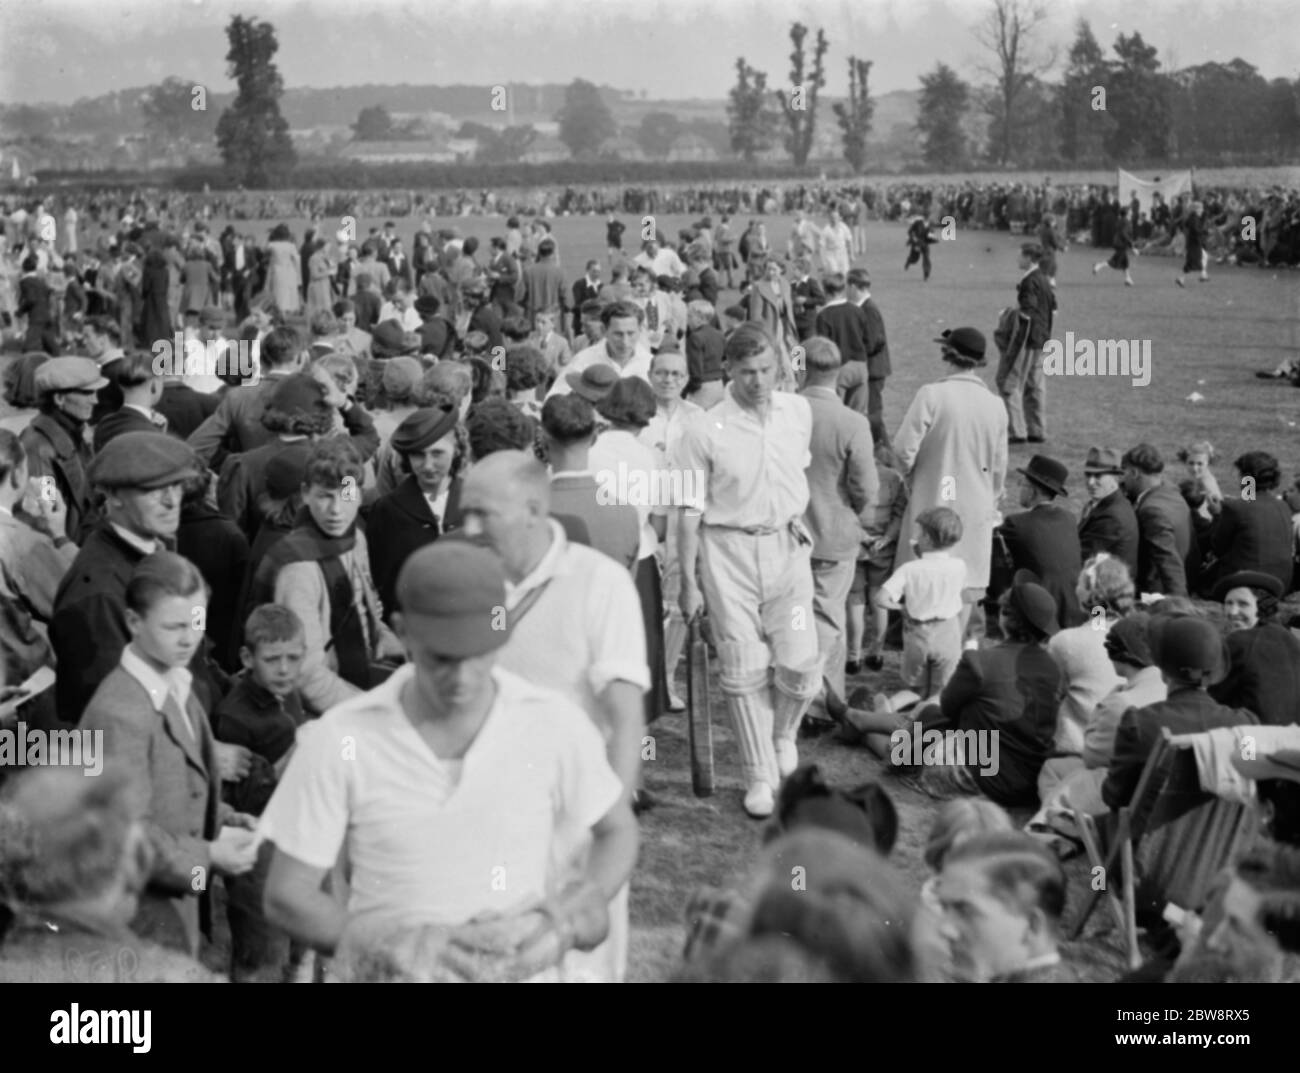 A press cricket team versus Newcross Speedway cricket team at Sidcup , Kent . The batting team leave the pitch . Charles Milne , F E Mockford , E t Groves , S E J R Perry and Norman Woolsey . 1938 . Stock Photo